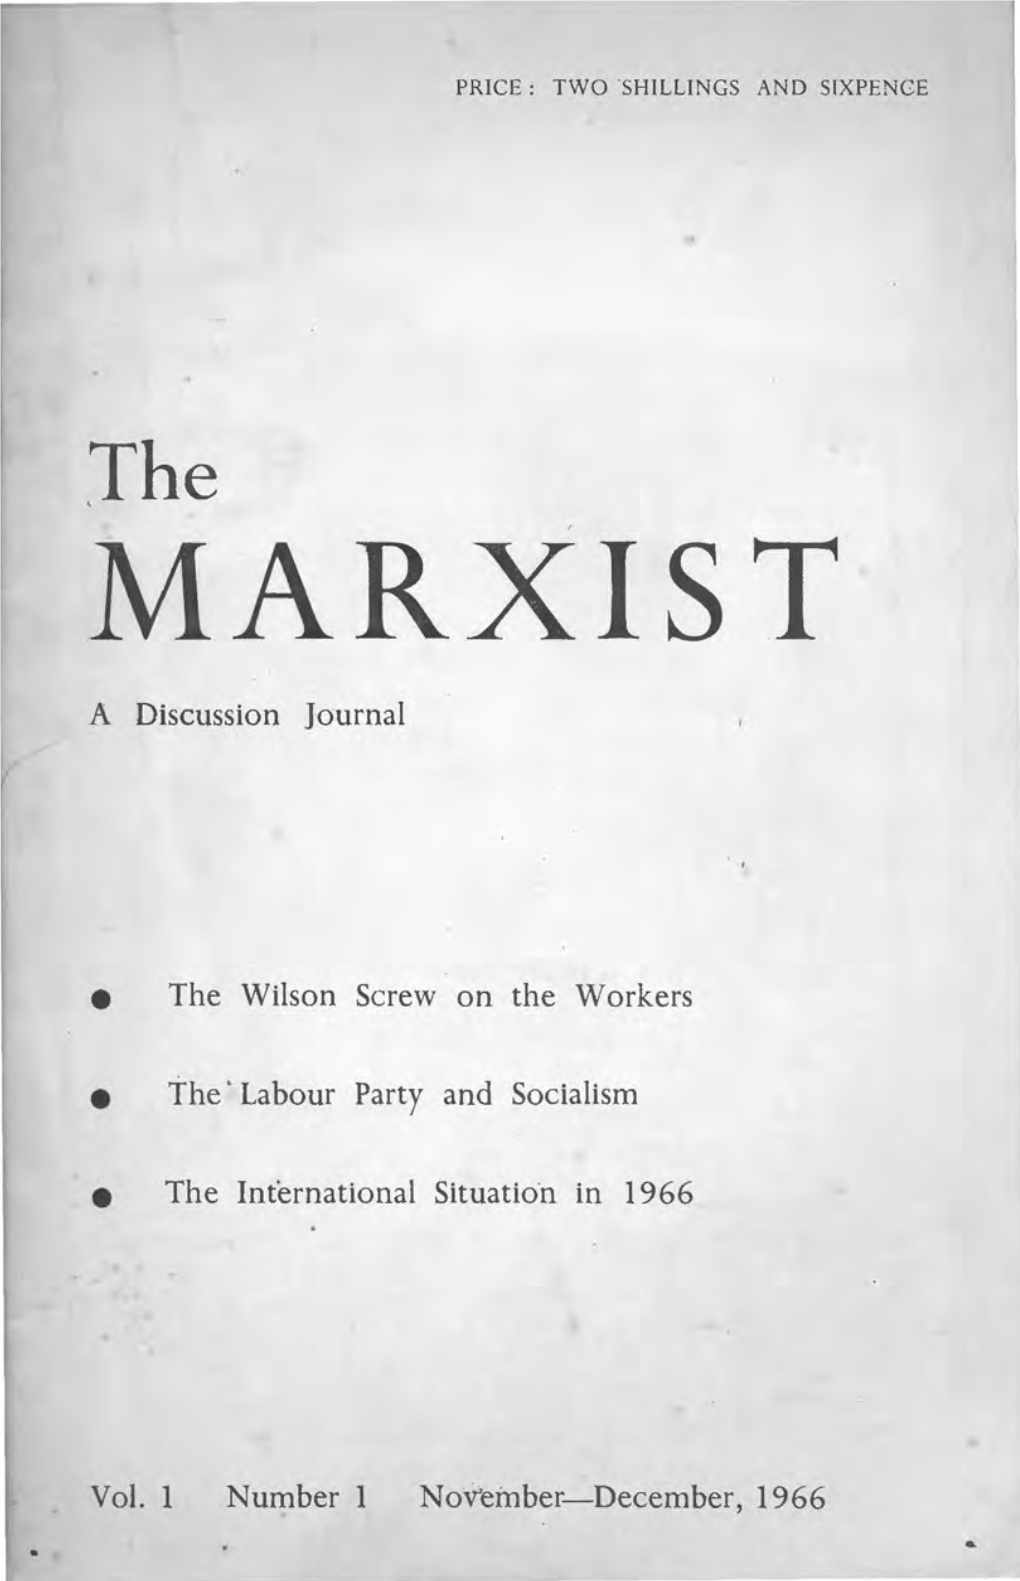 MARXIST a Discussion Journal